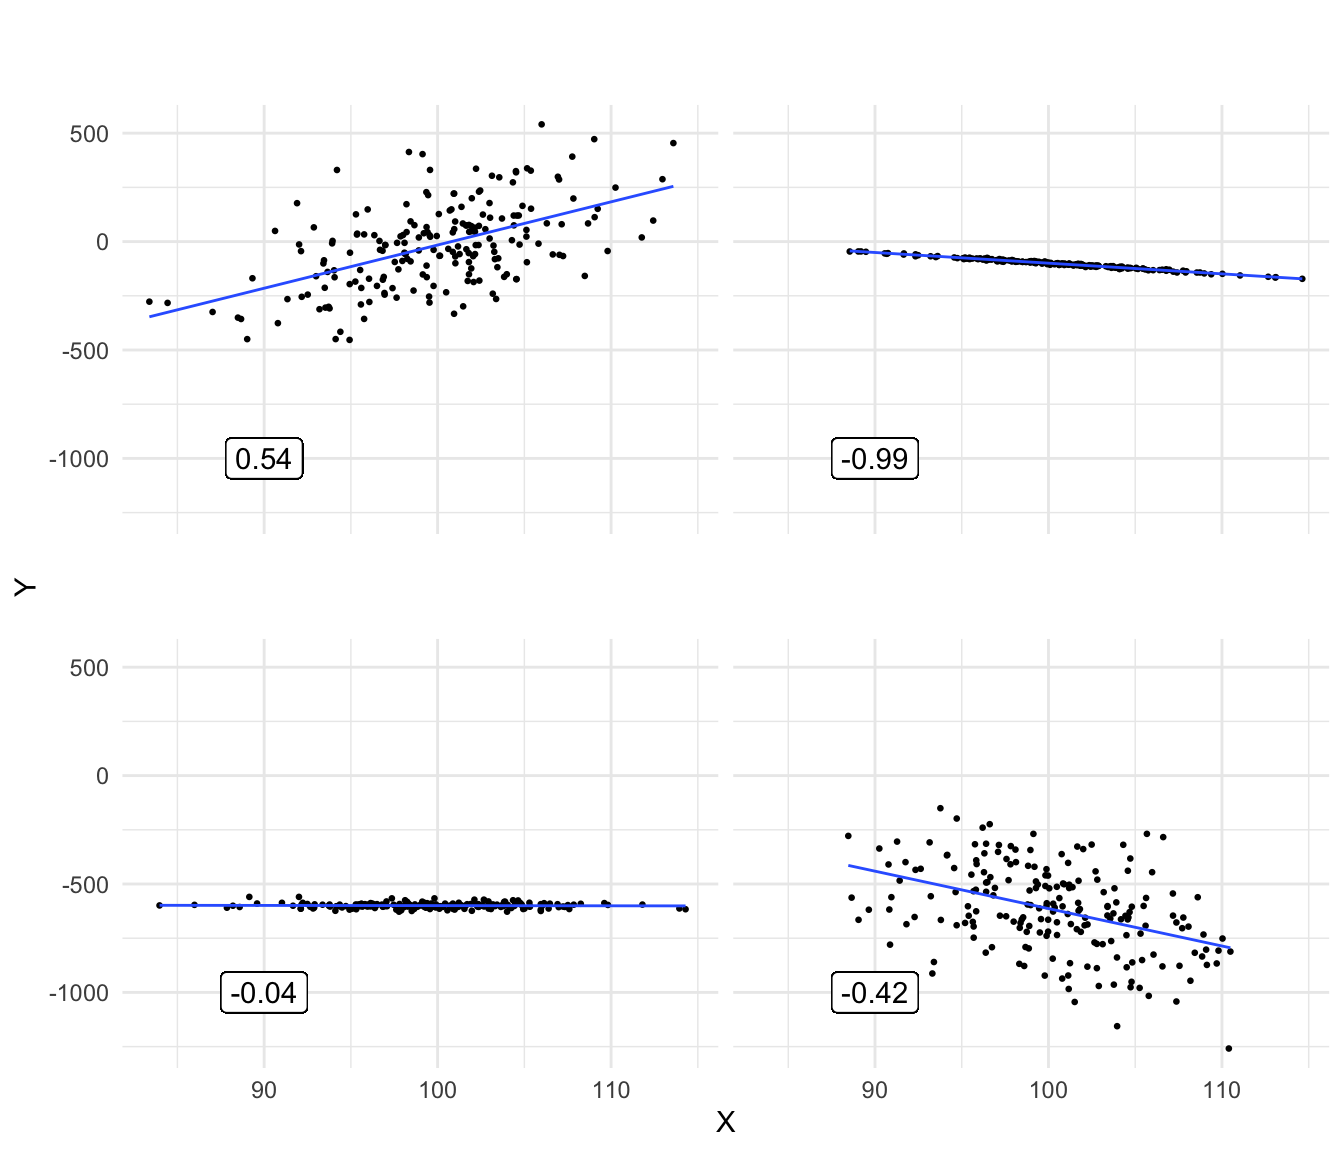 Various plots showing different correlations between variables X and Y.